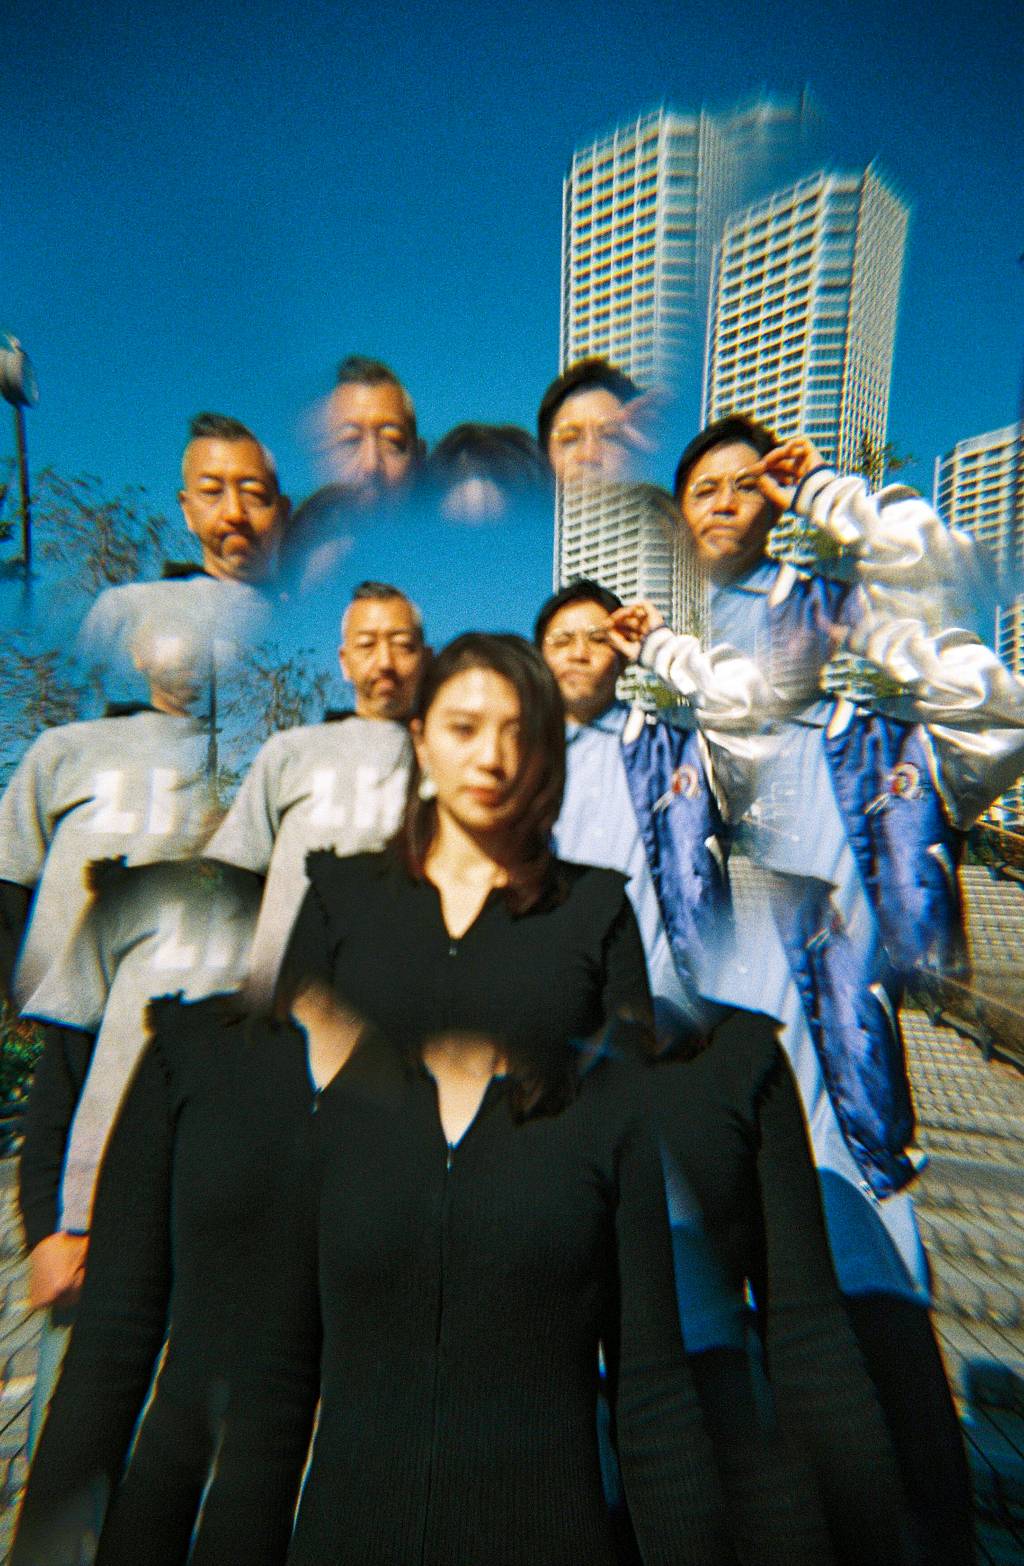 Gocchin: Creating an Illusionary World With the Lomoapparat